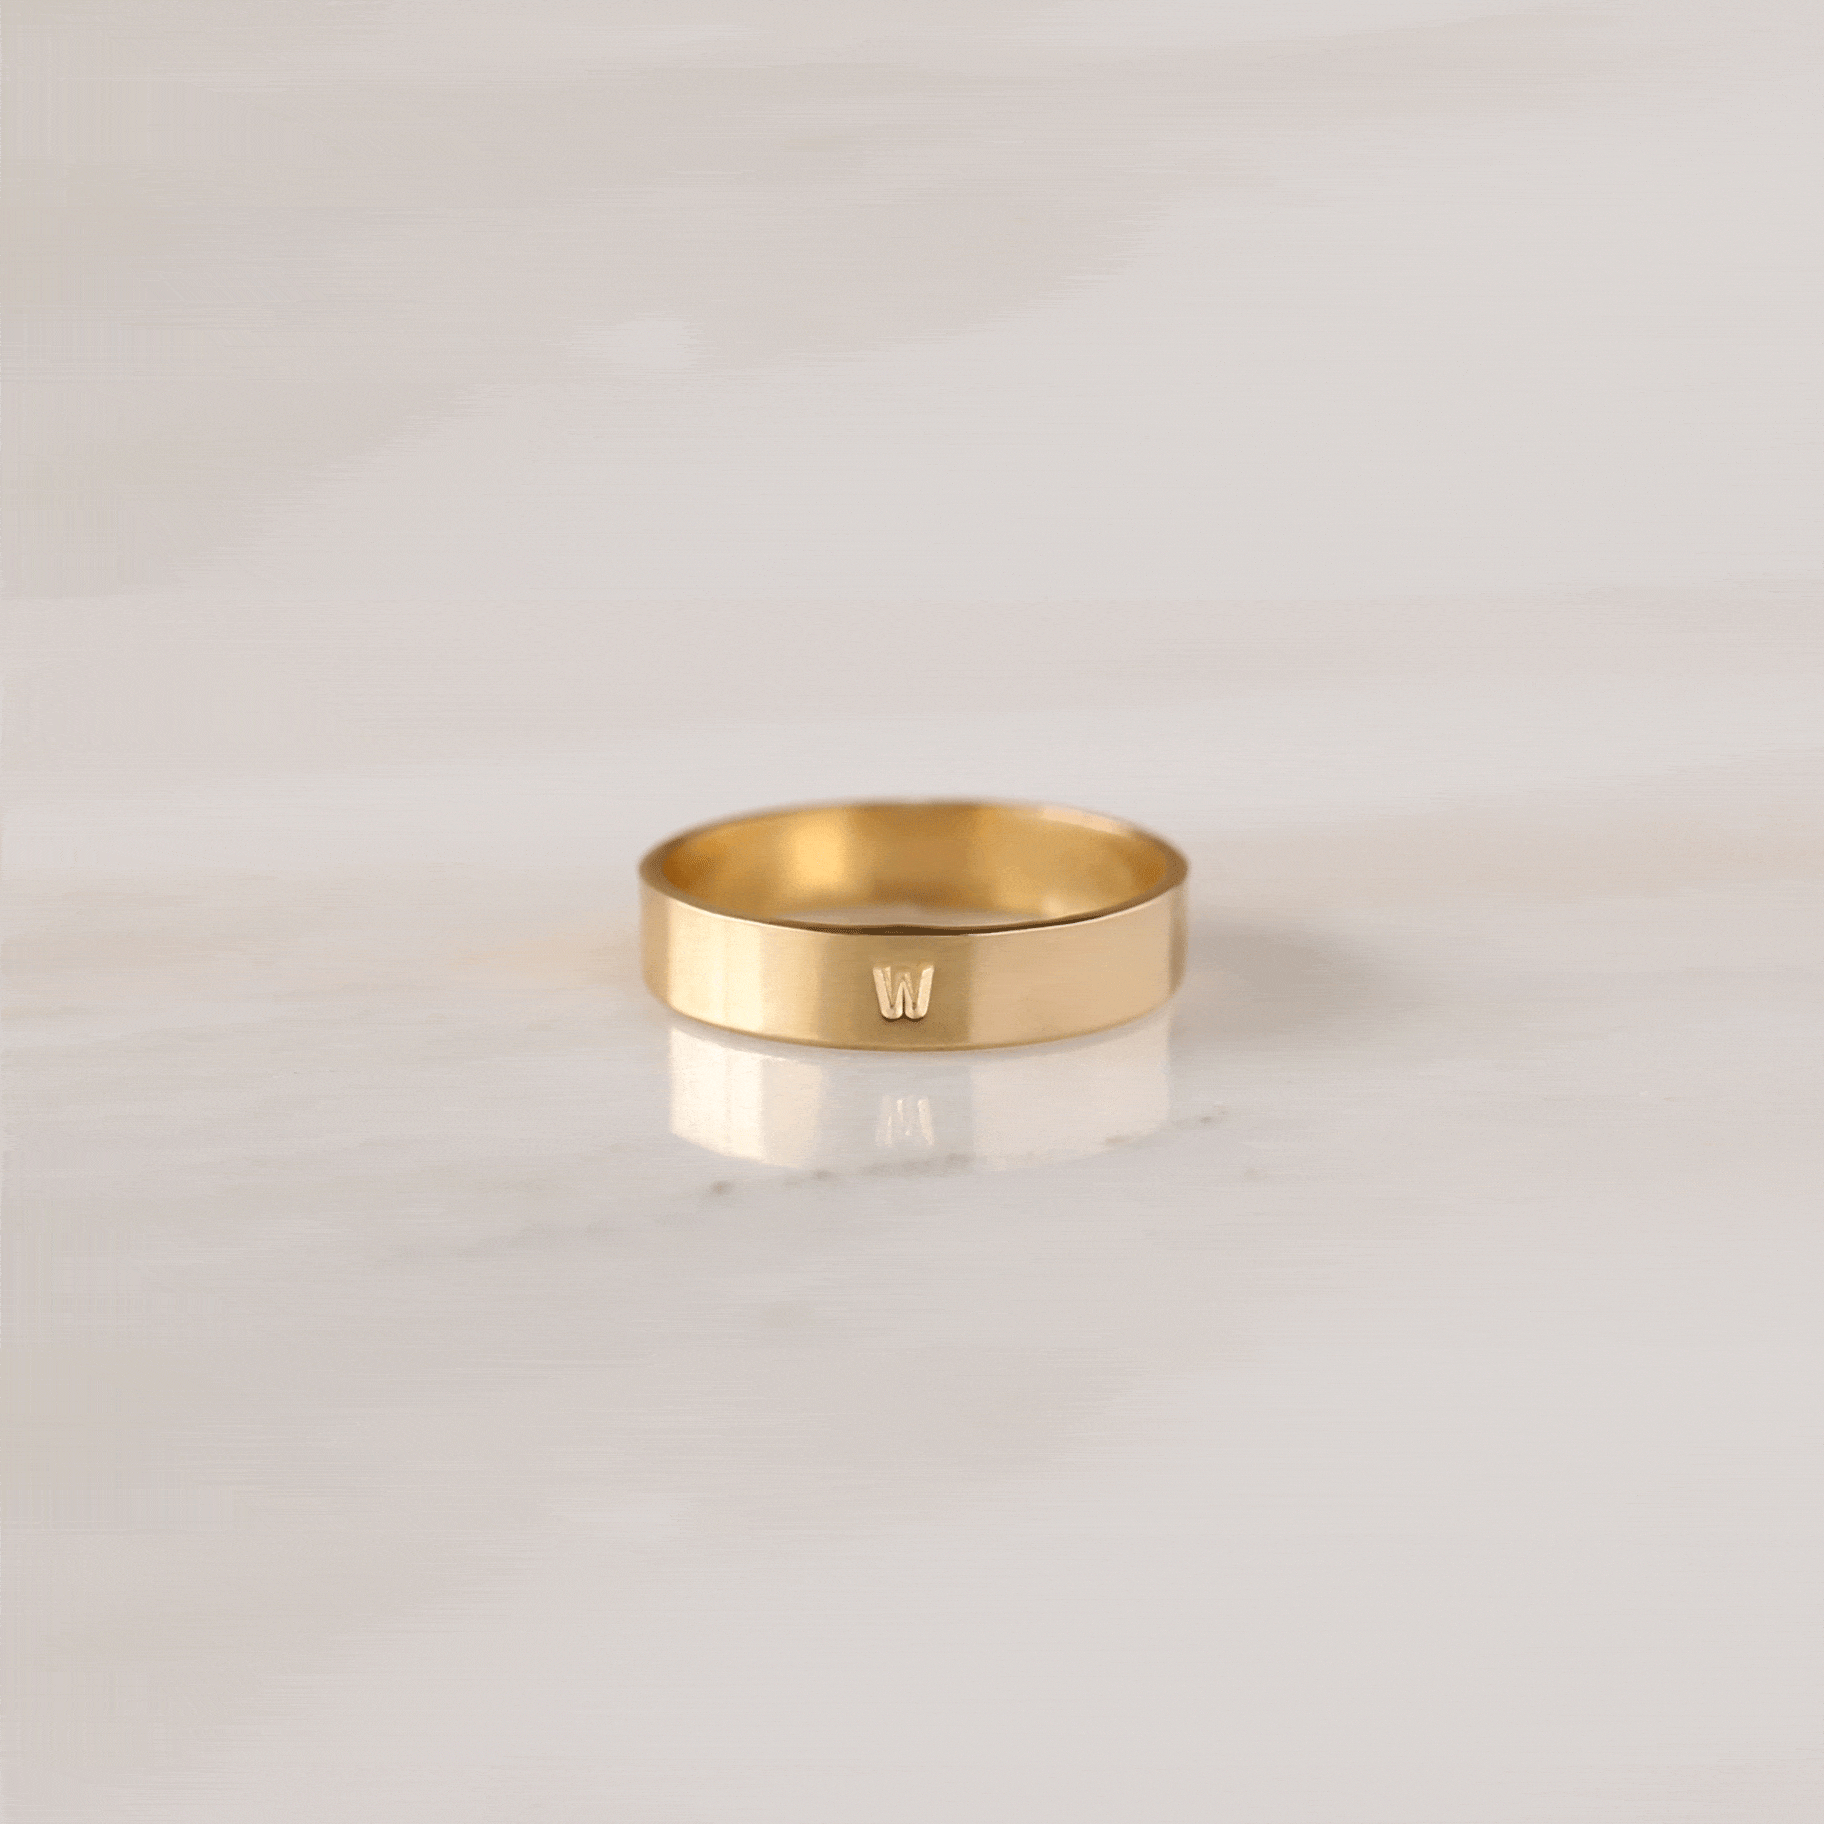 Maude Ring - Nolia Jewelry - Meaningful + Sustainably Handcrafted Jewelry